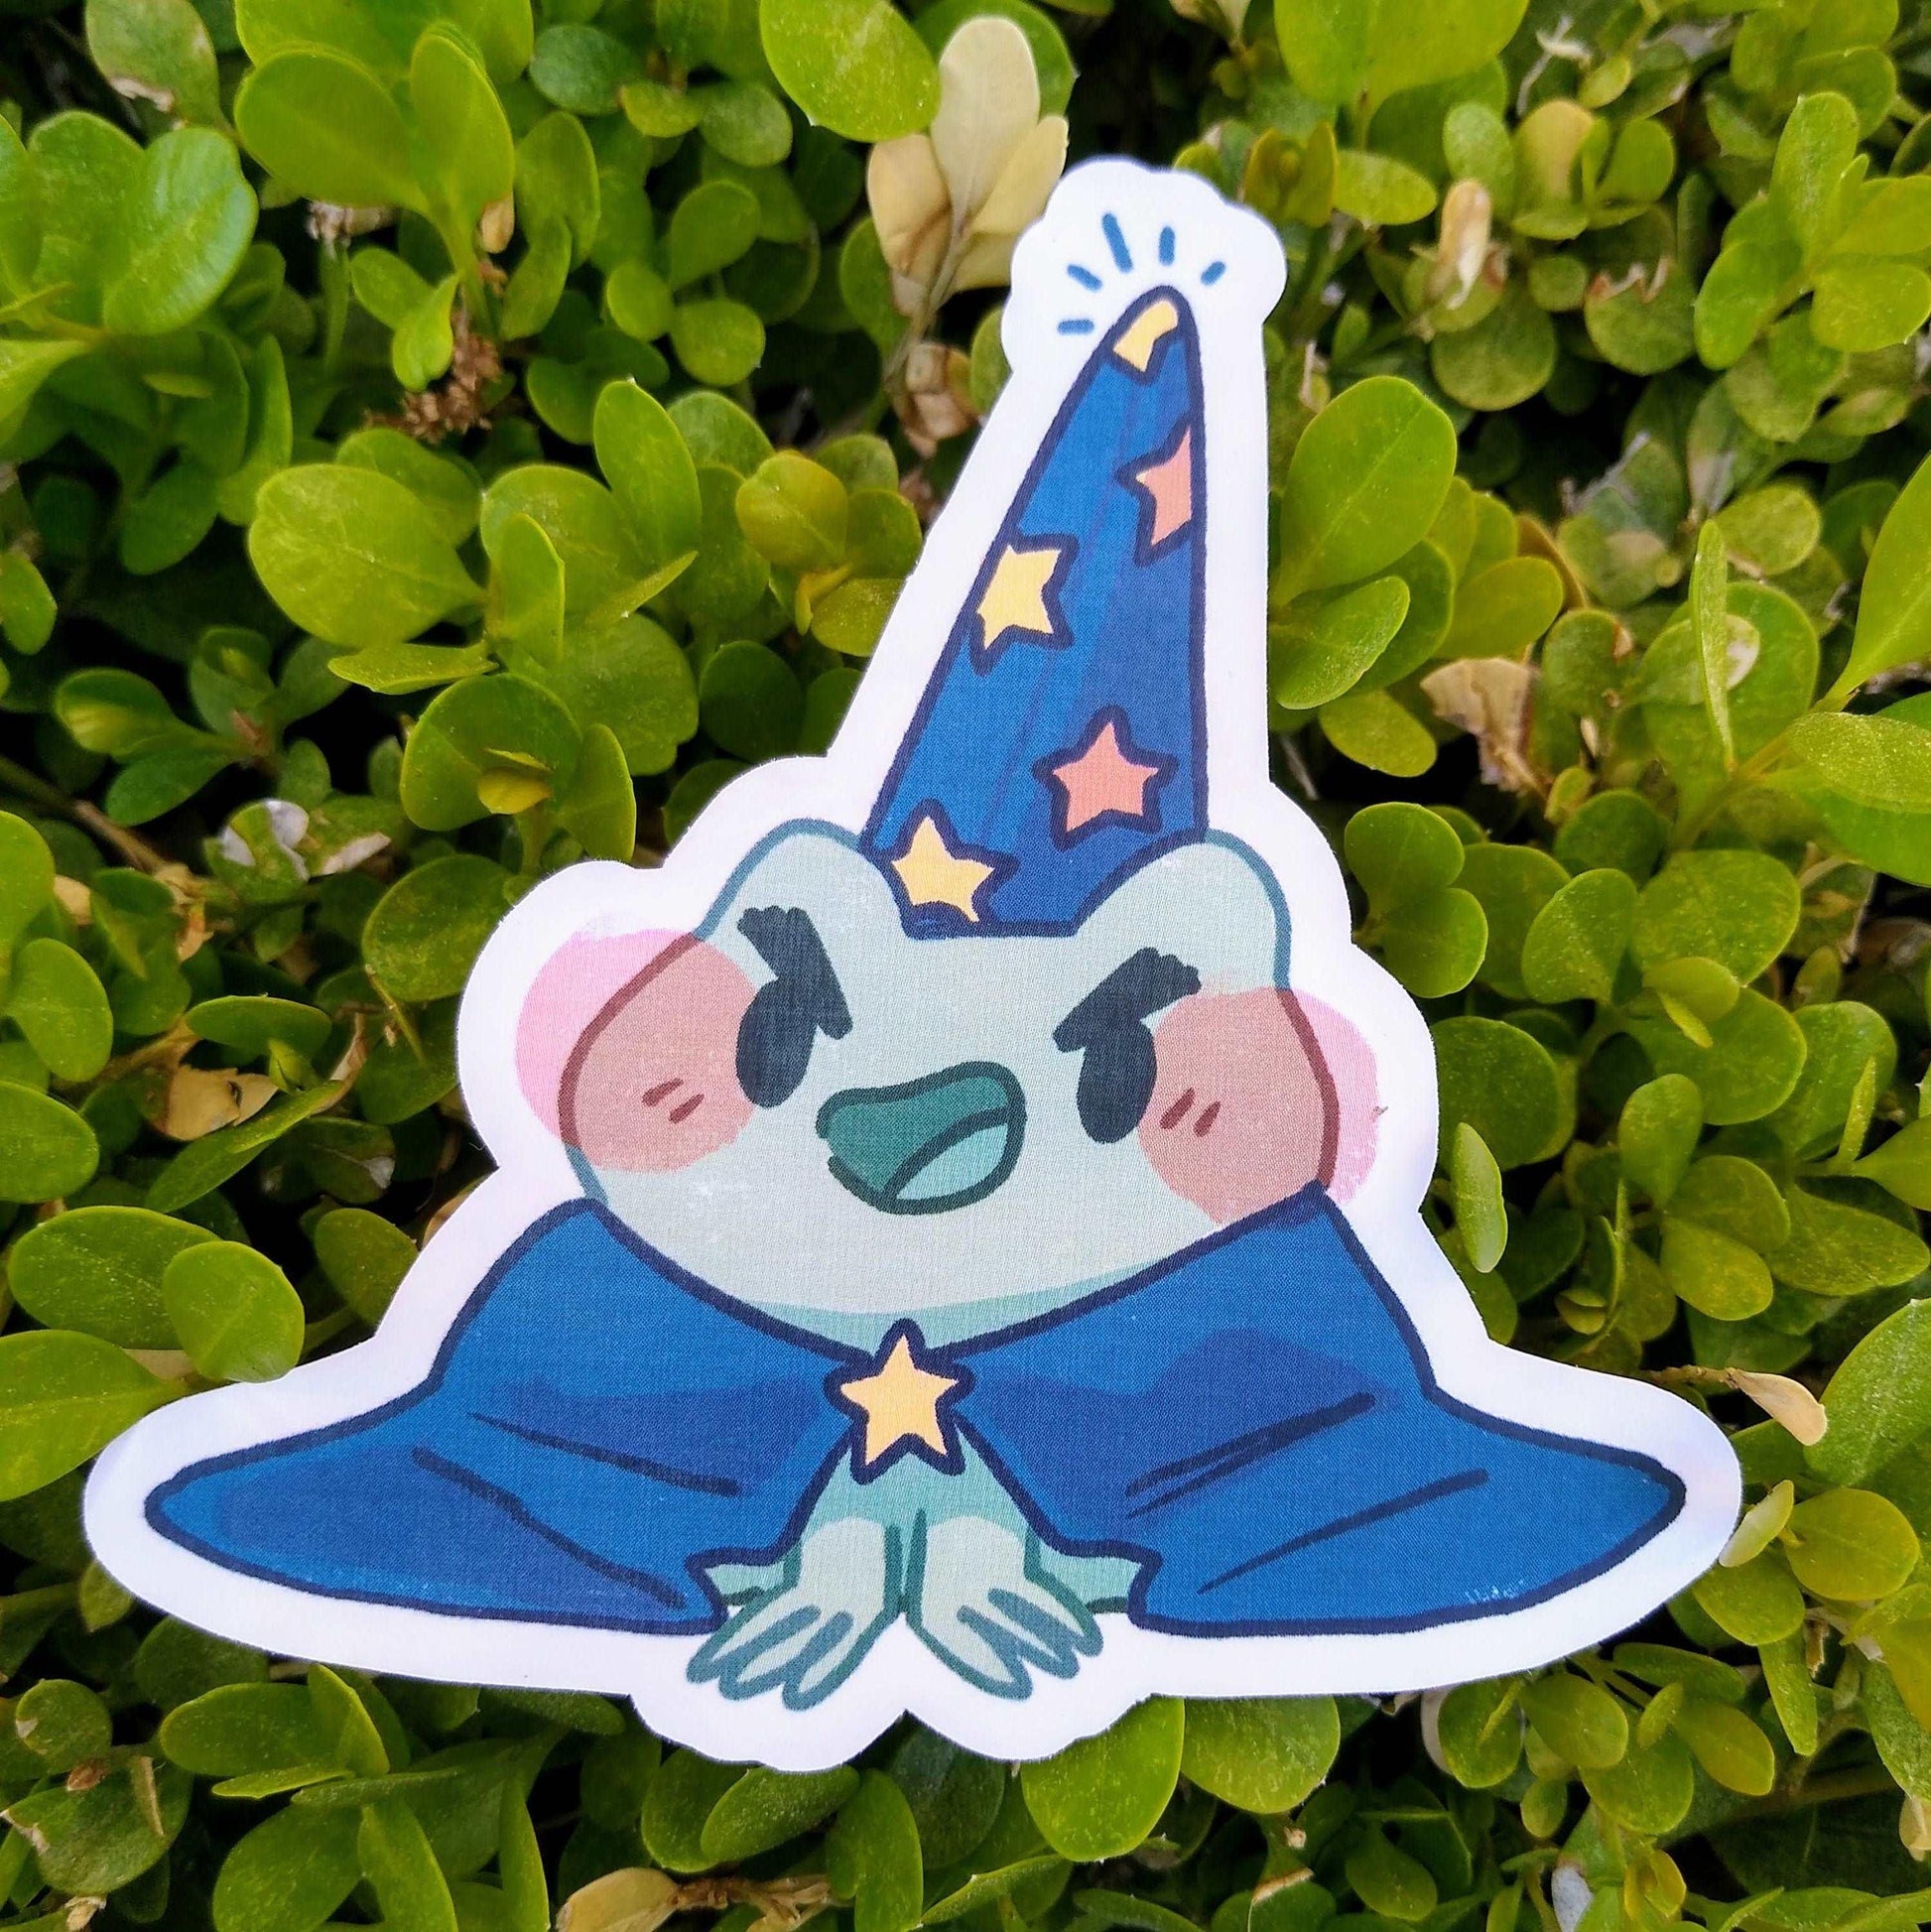 Frogs in Costumes Stickers!